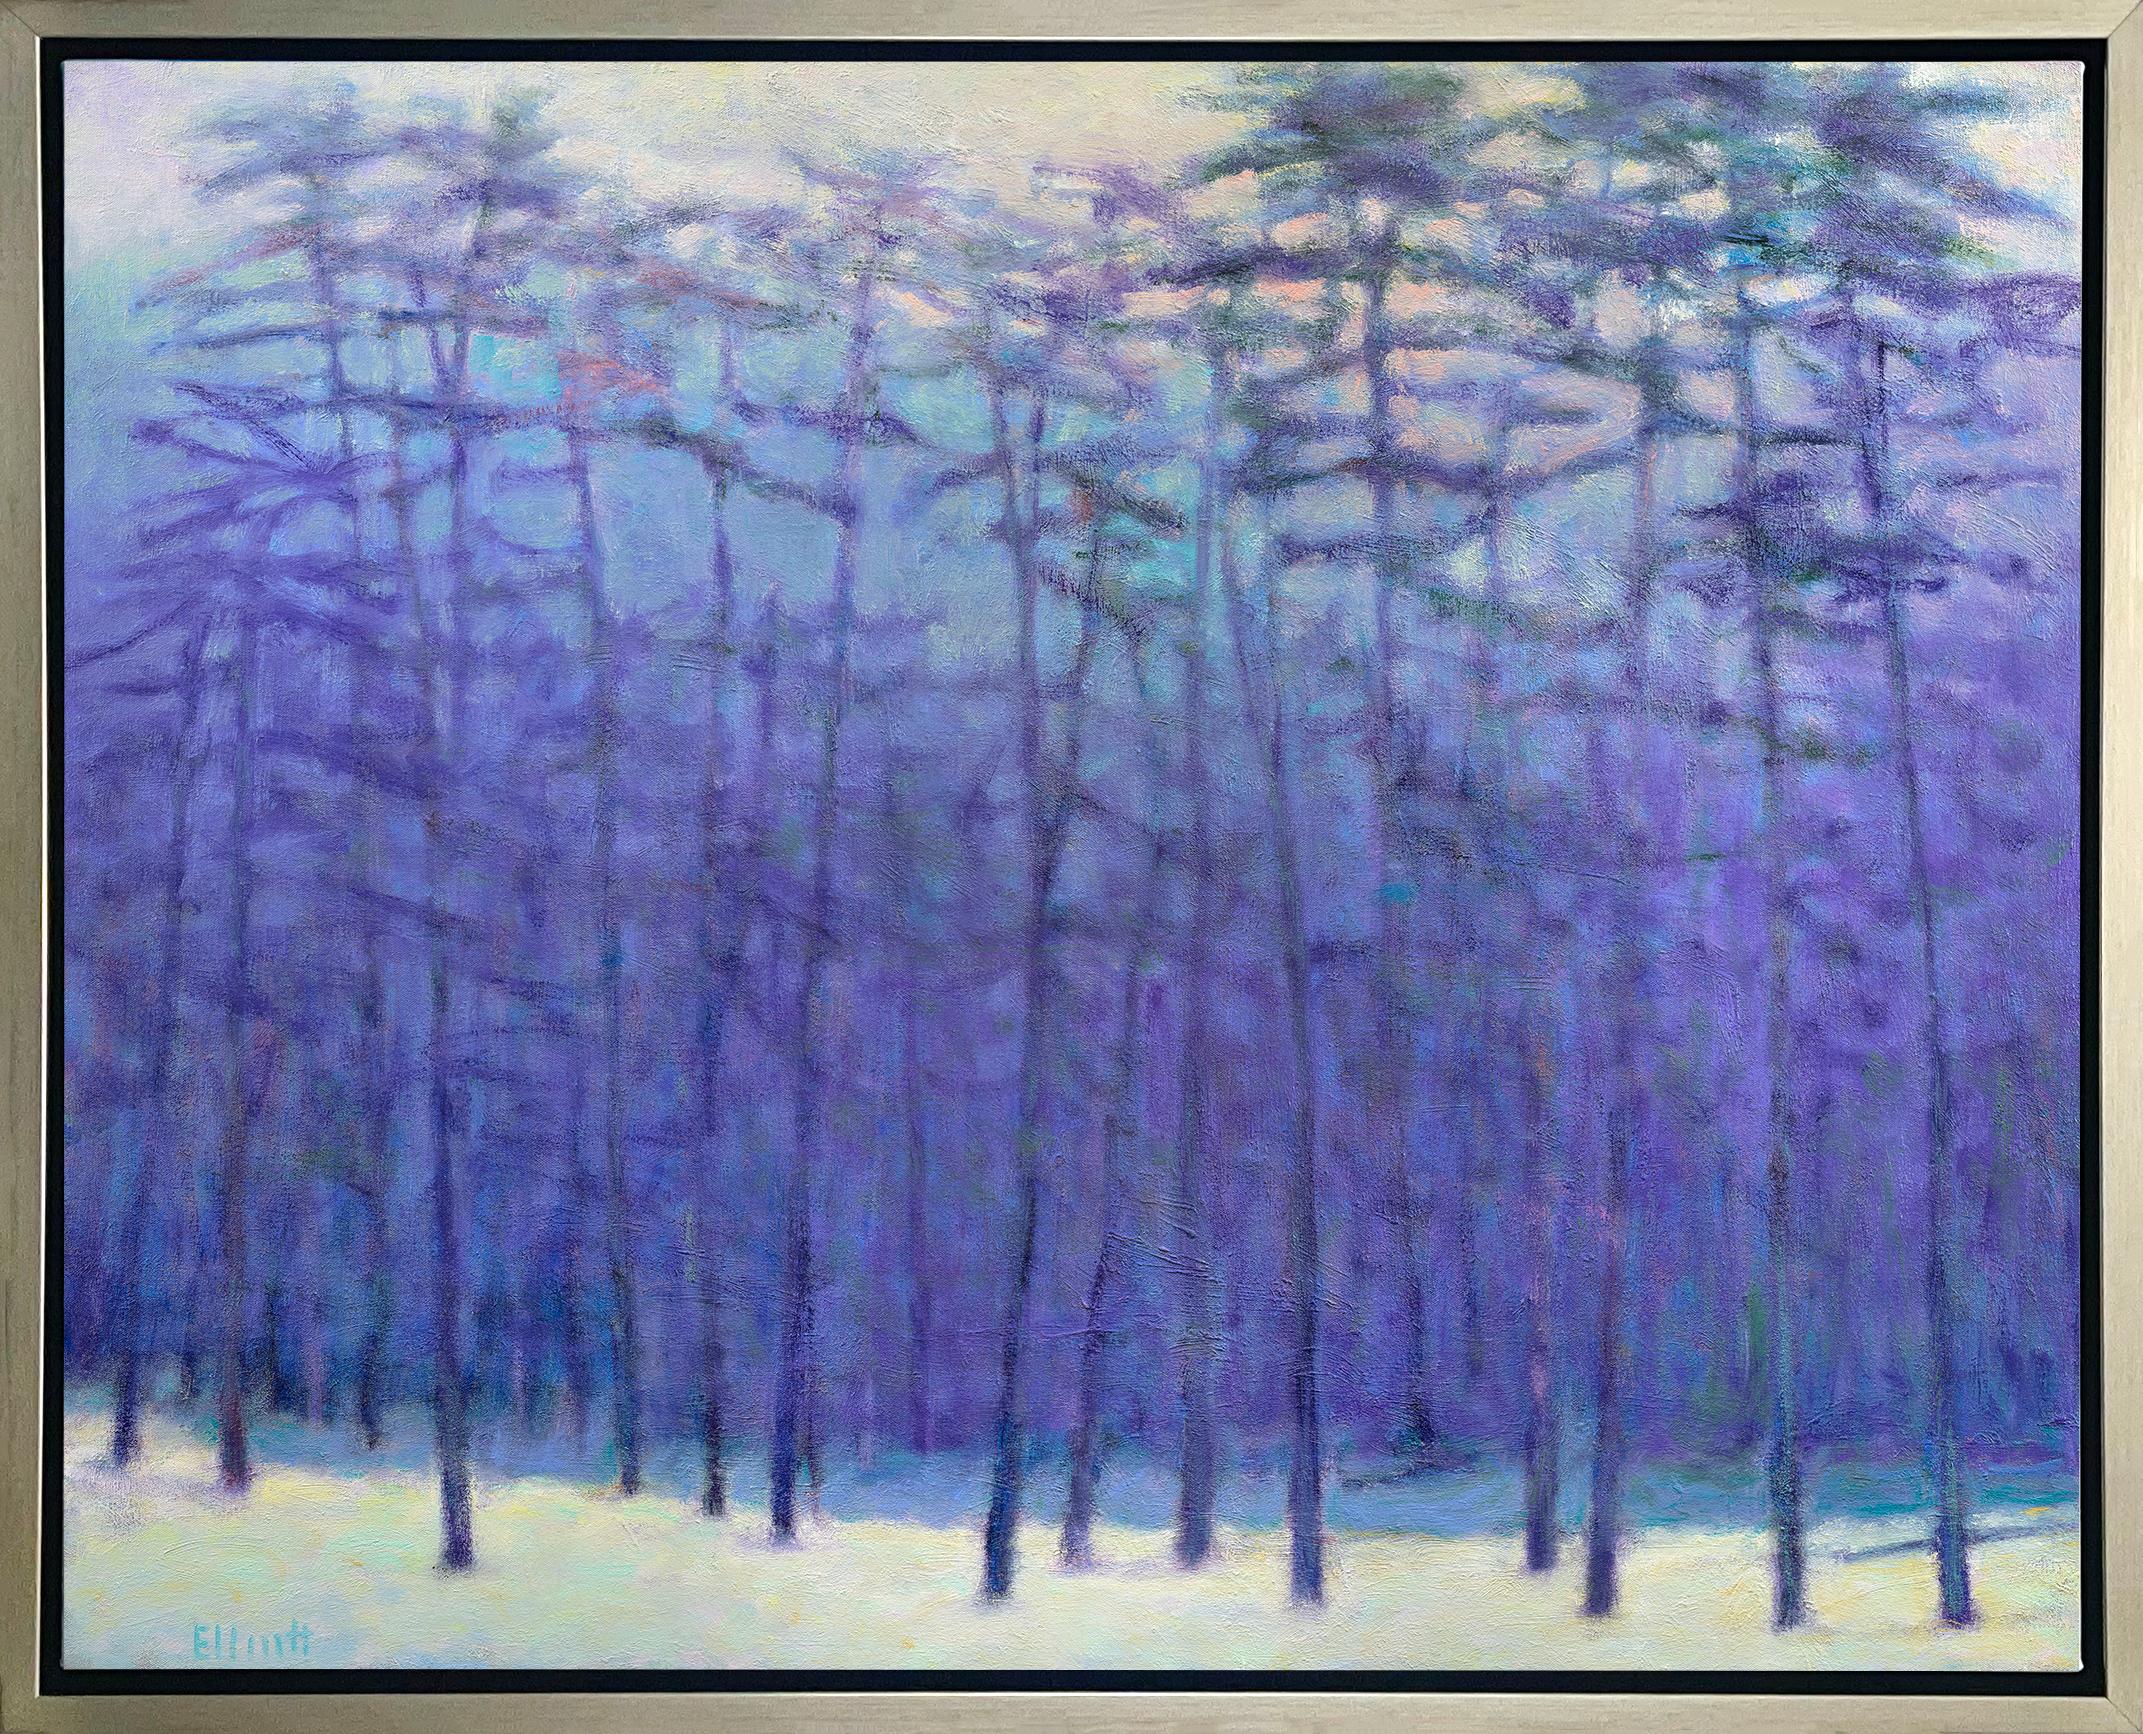 Ken Elliott Abstract Print - "Haze in the Forest, " Framed Limited Edition Giclee Print, 36" x 45"